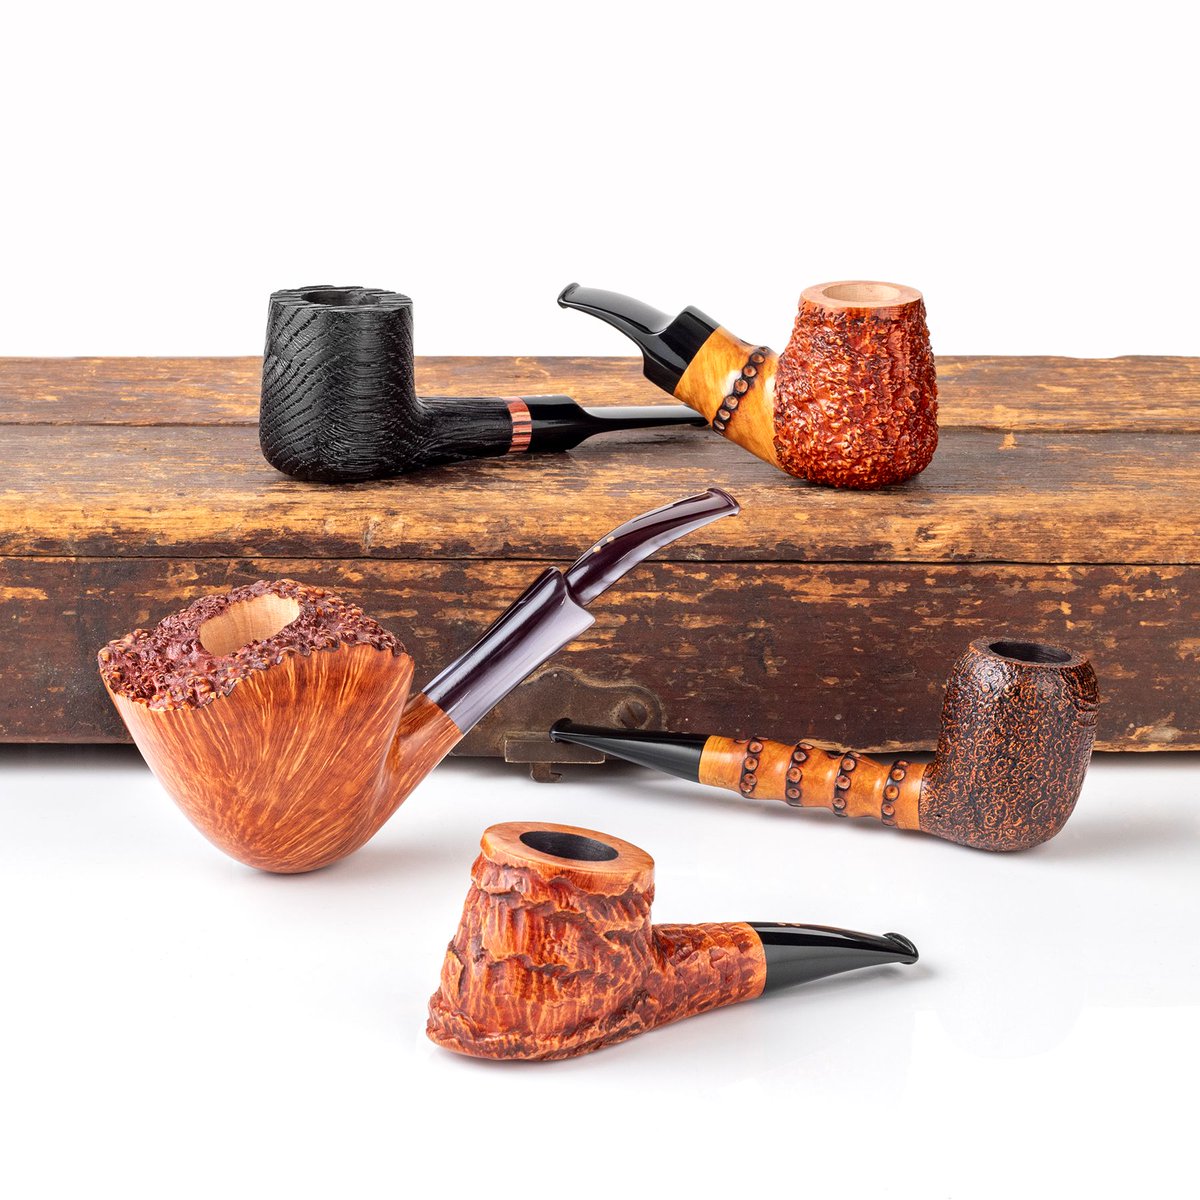 Since 1980, Radice pipes have been a cornerstone of pipe shaping and craftsmanship. Today, new Radice pipes are available on-site in a variety of styles including oversized pieces, morta wood pipes, and a two-pipe set.
smokingpip.es/4bsamBD

#smokingpipes #radicepipes